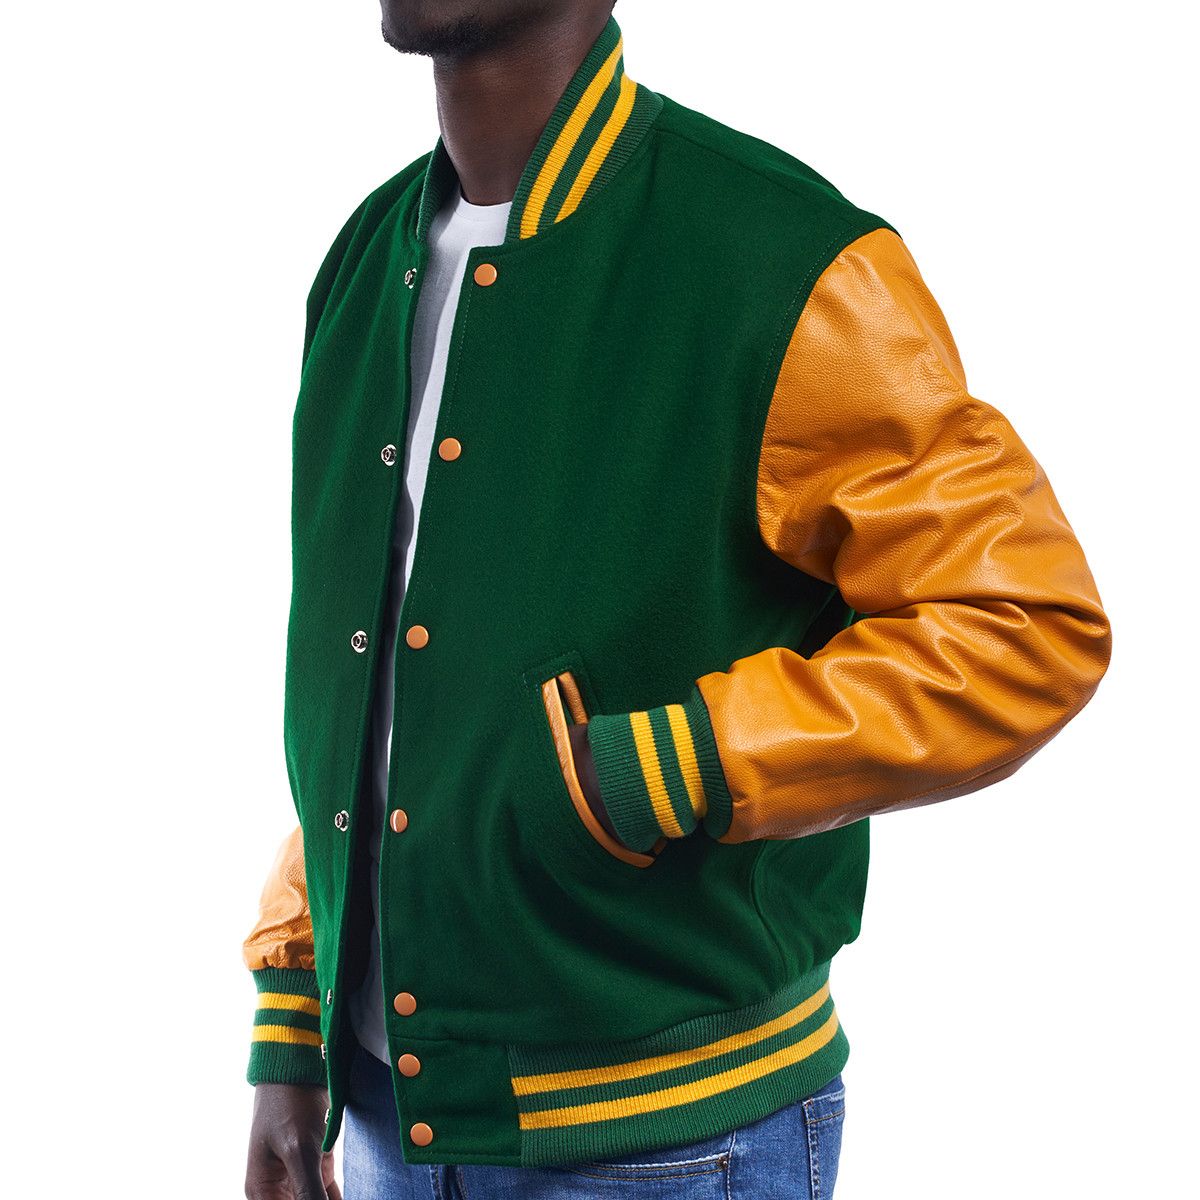 Kelly Green Wool Body & Bright White Leather Sleeves Letterman Jacket